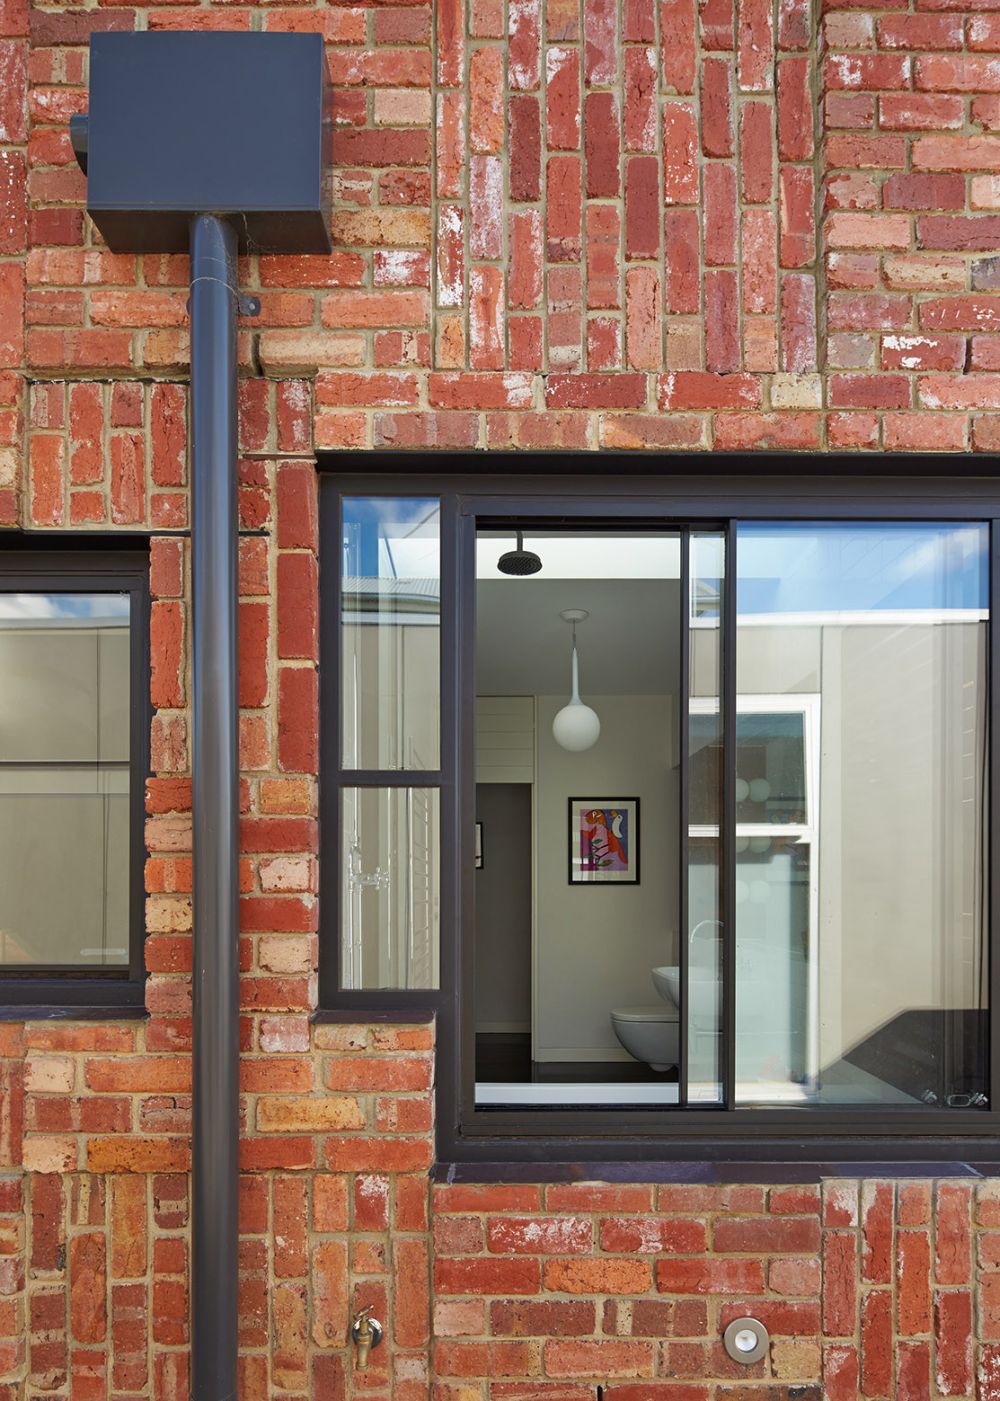 The Cubo House in Australia with Brick Facade